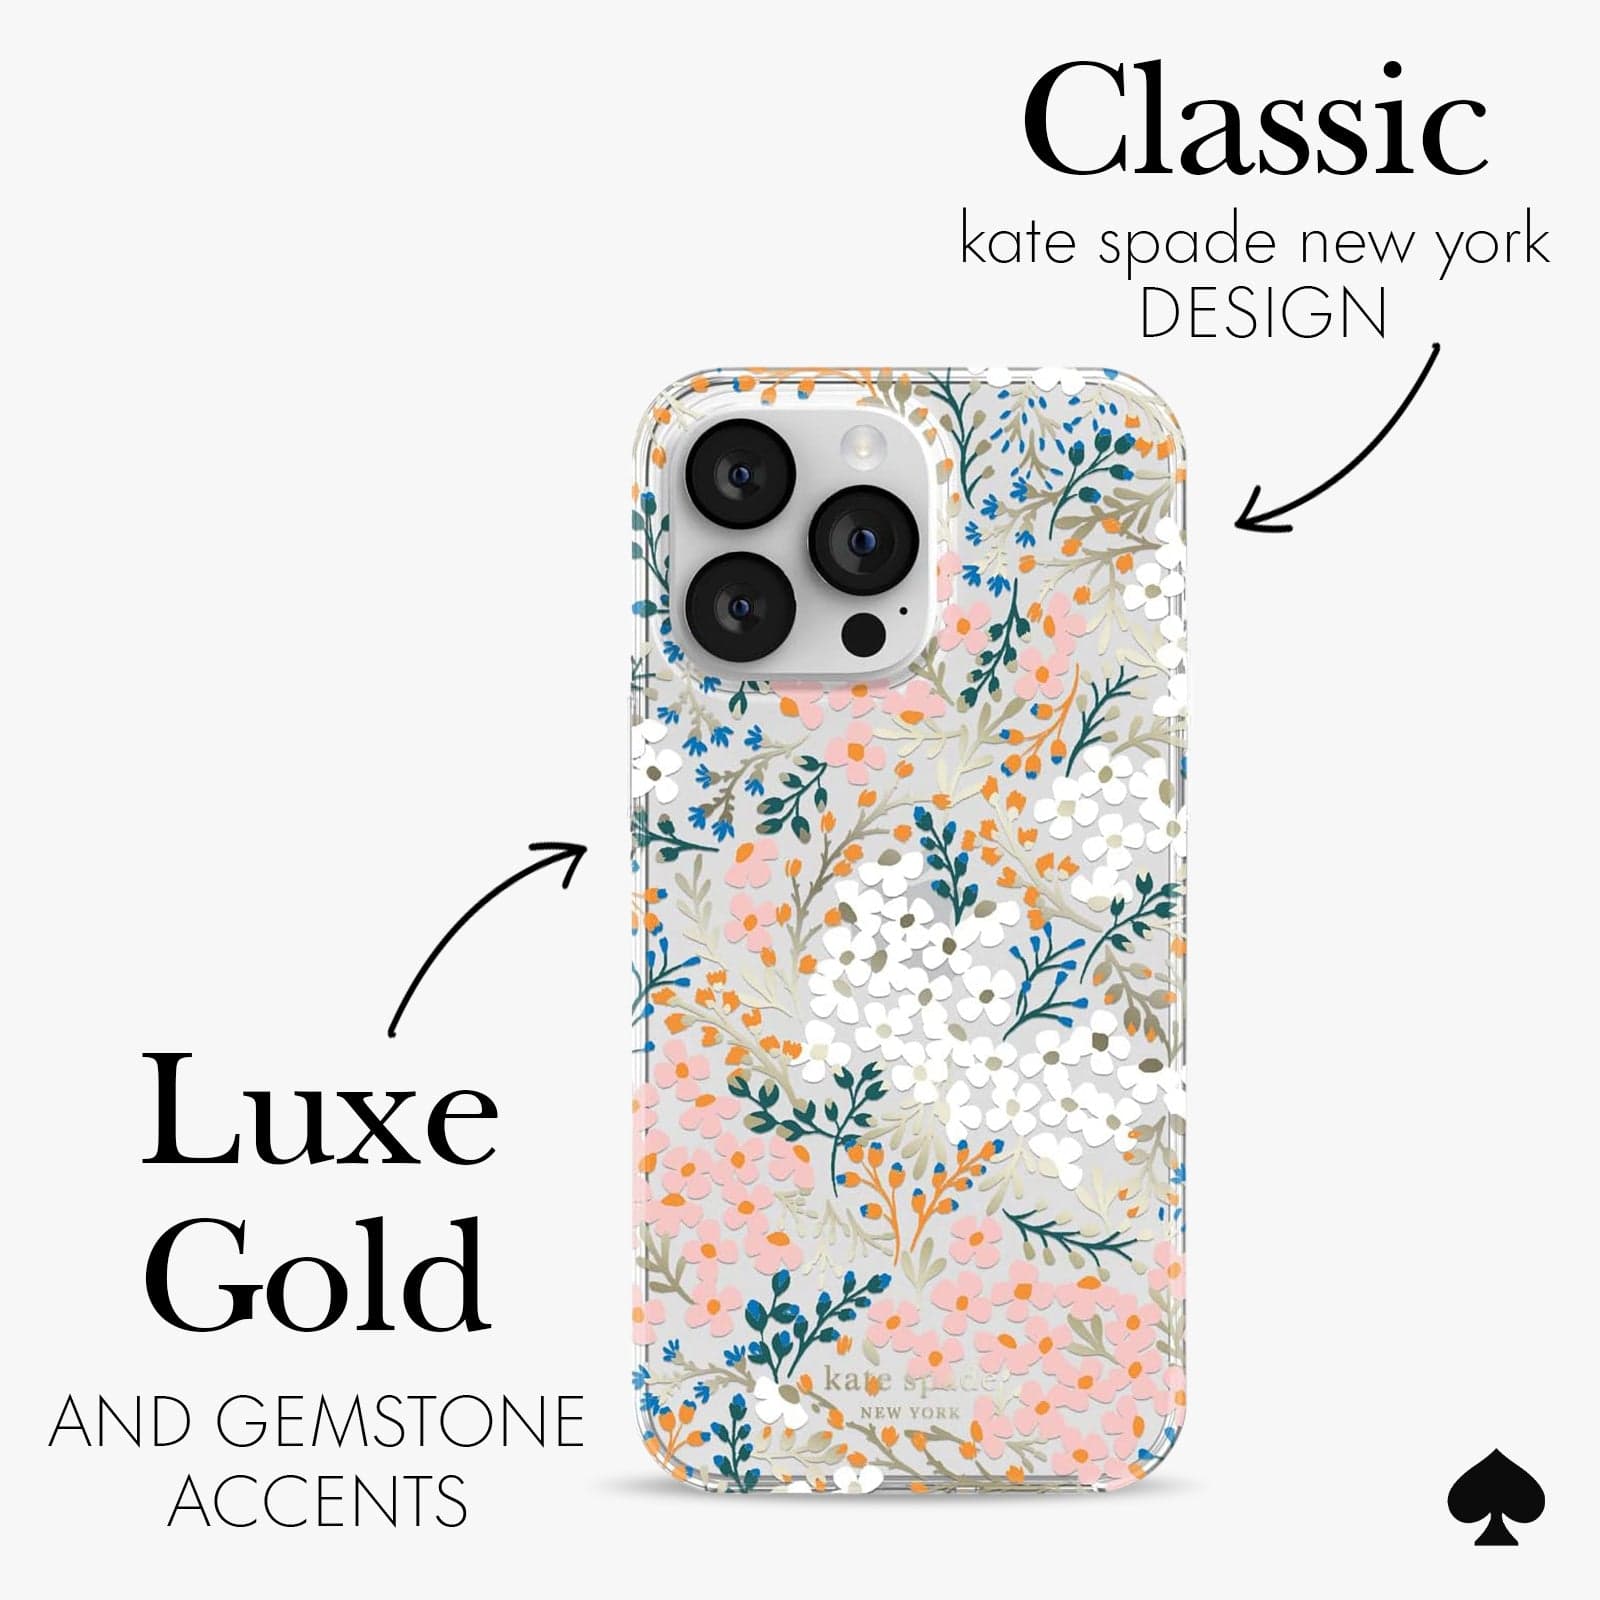 classic kate spade new york deisgn and luxe gold gemstone accents